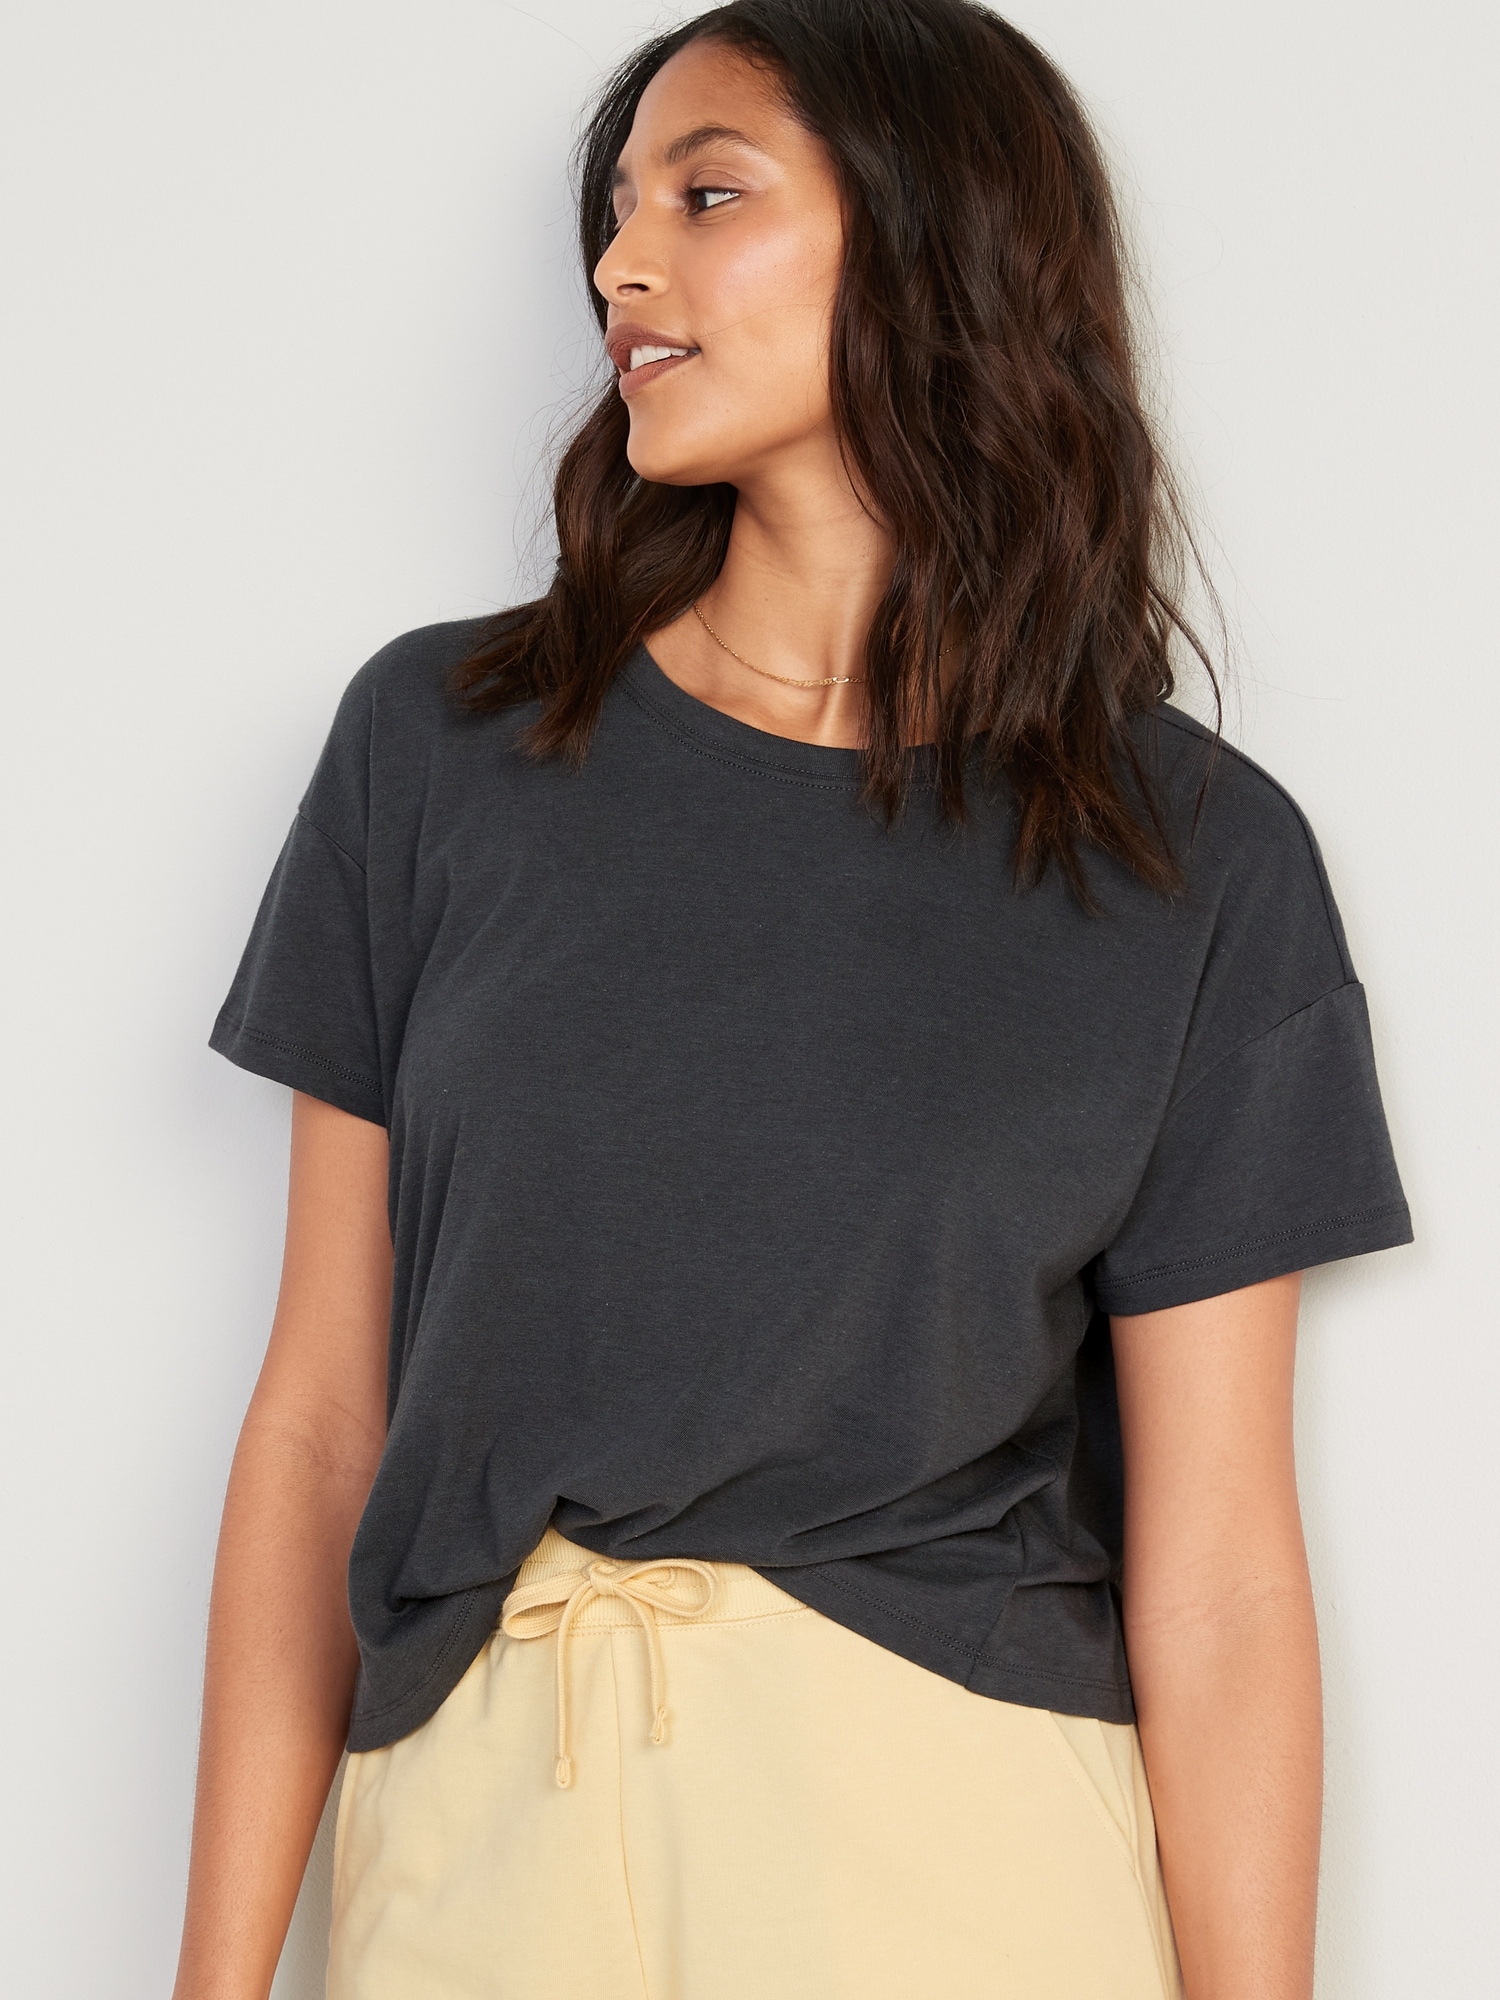 Cropped Tops For Women | Old Navy